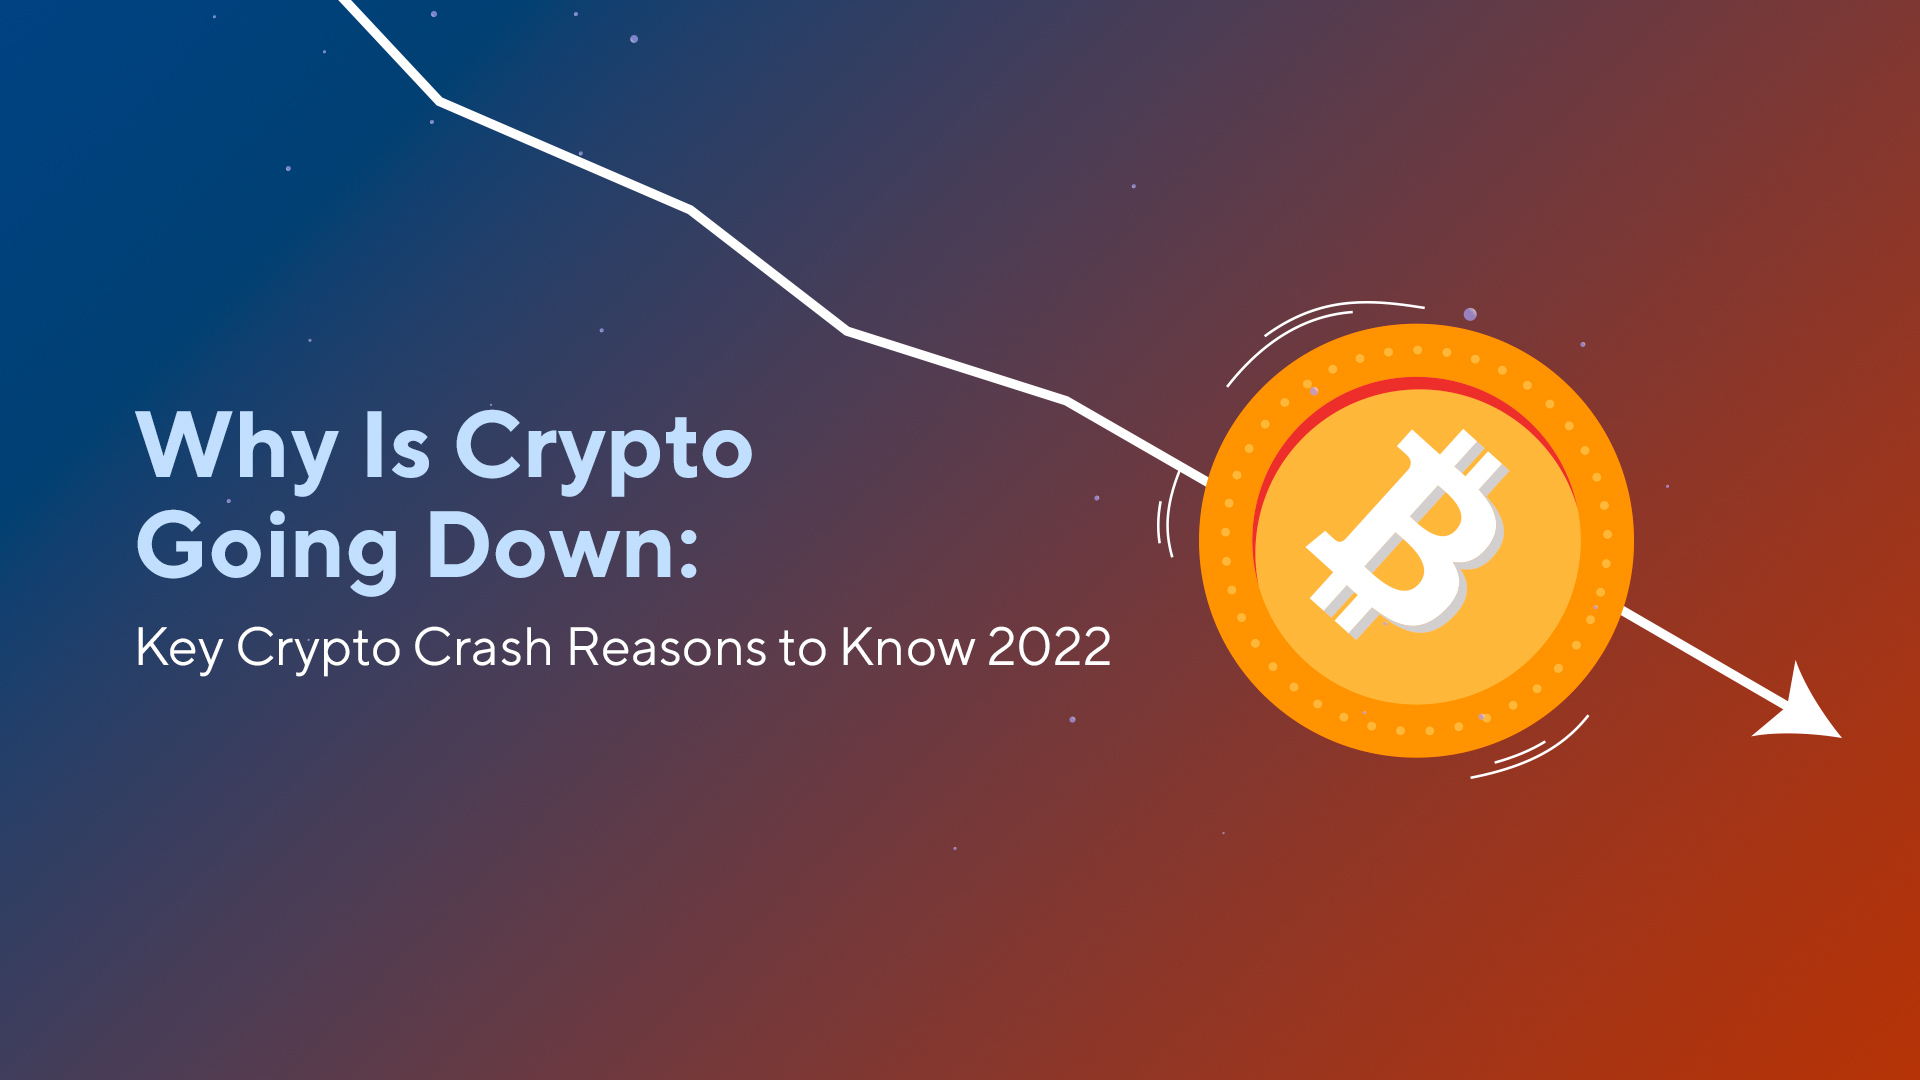 Why Is Crypto Going Down: Key Crypto Crash Reasons to Know 2022